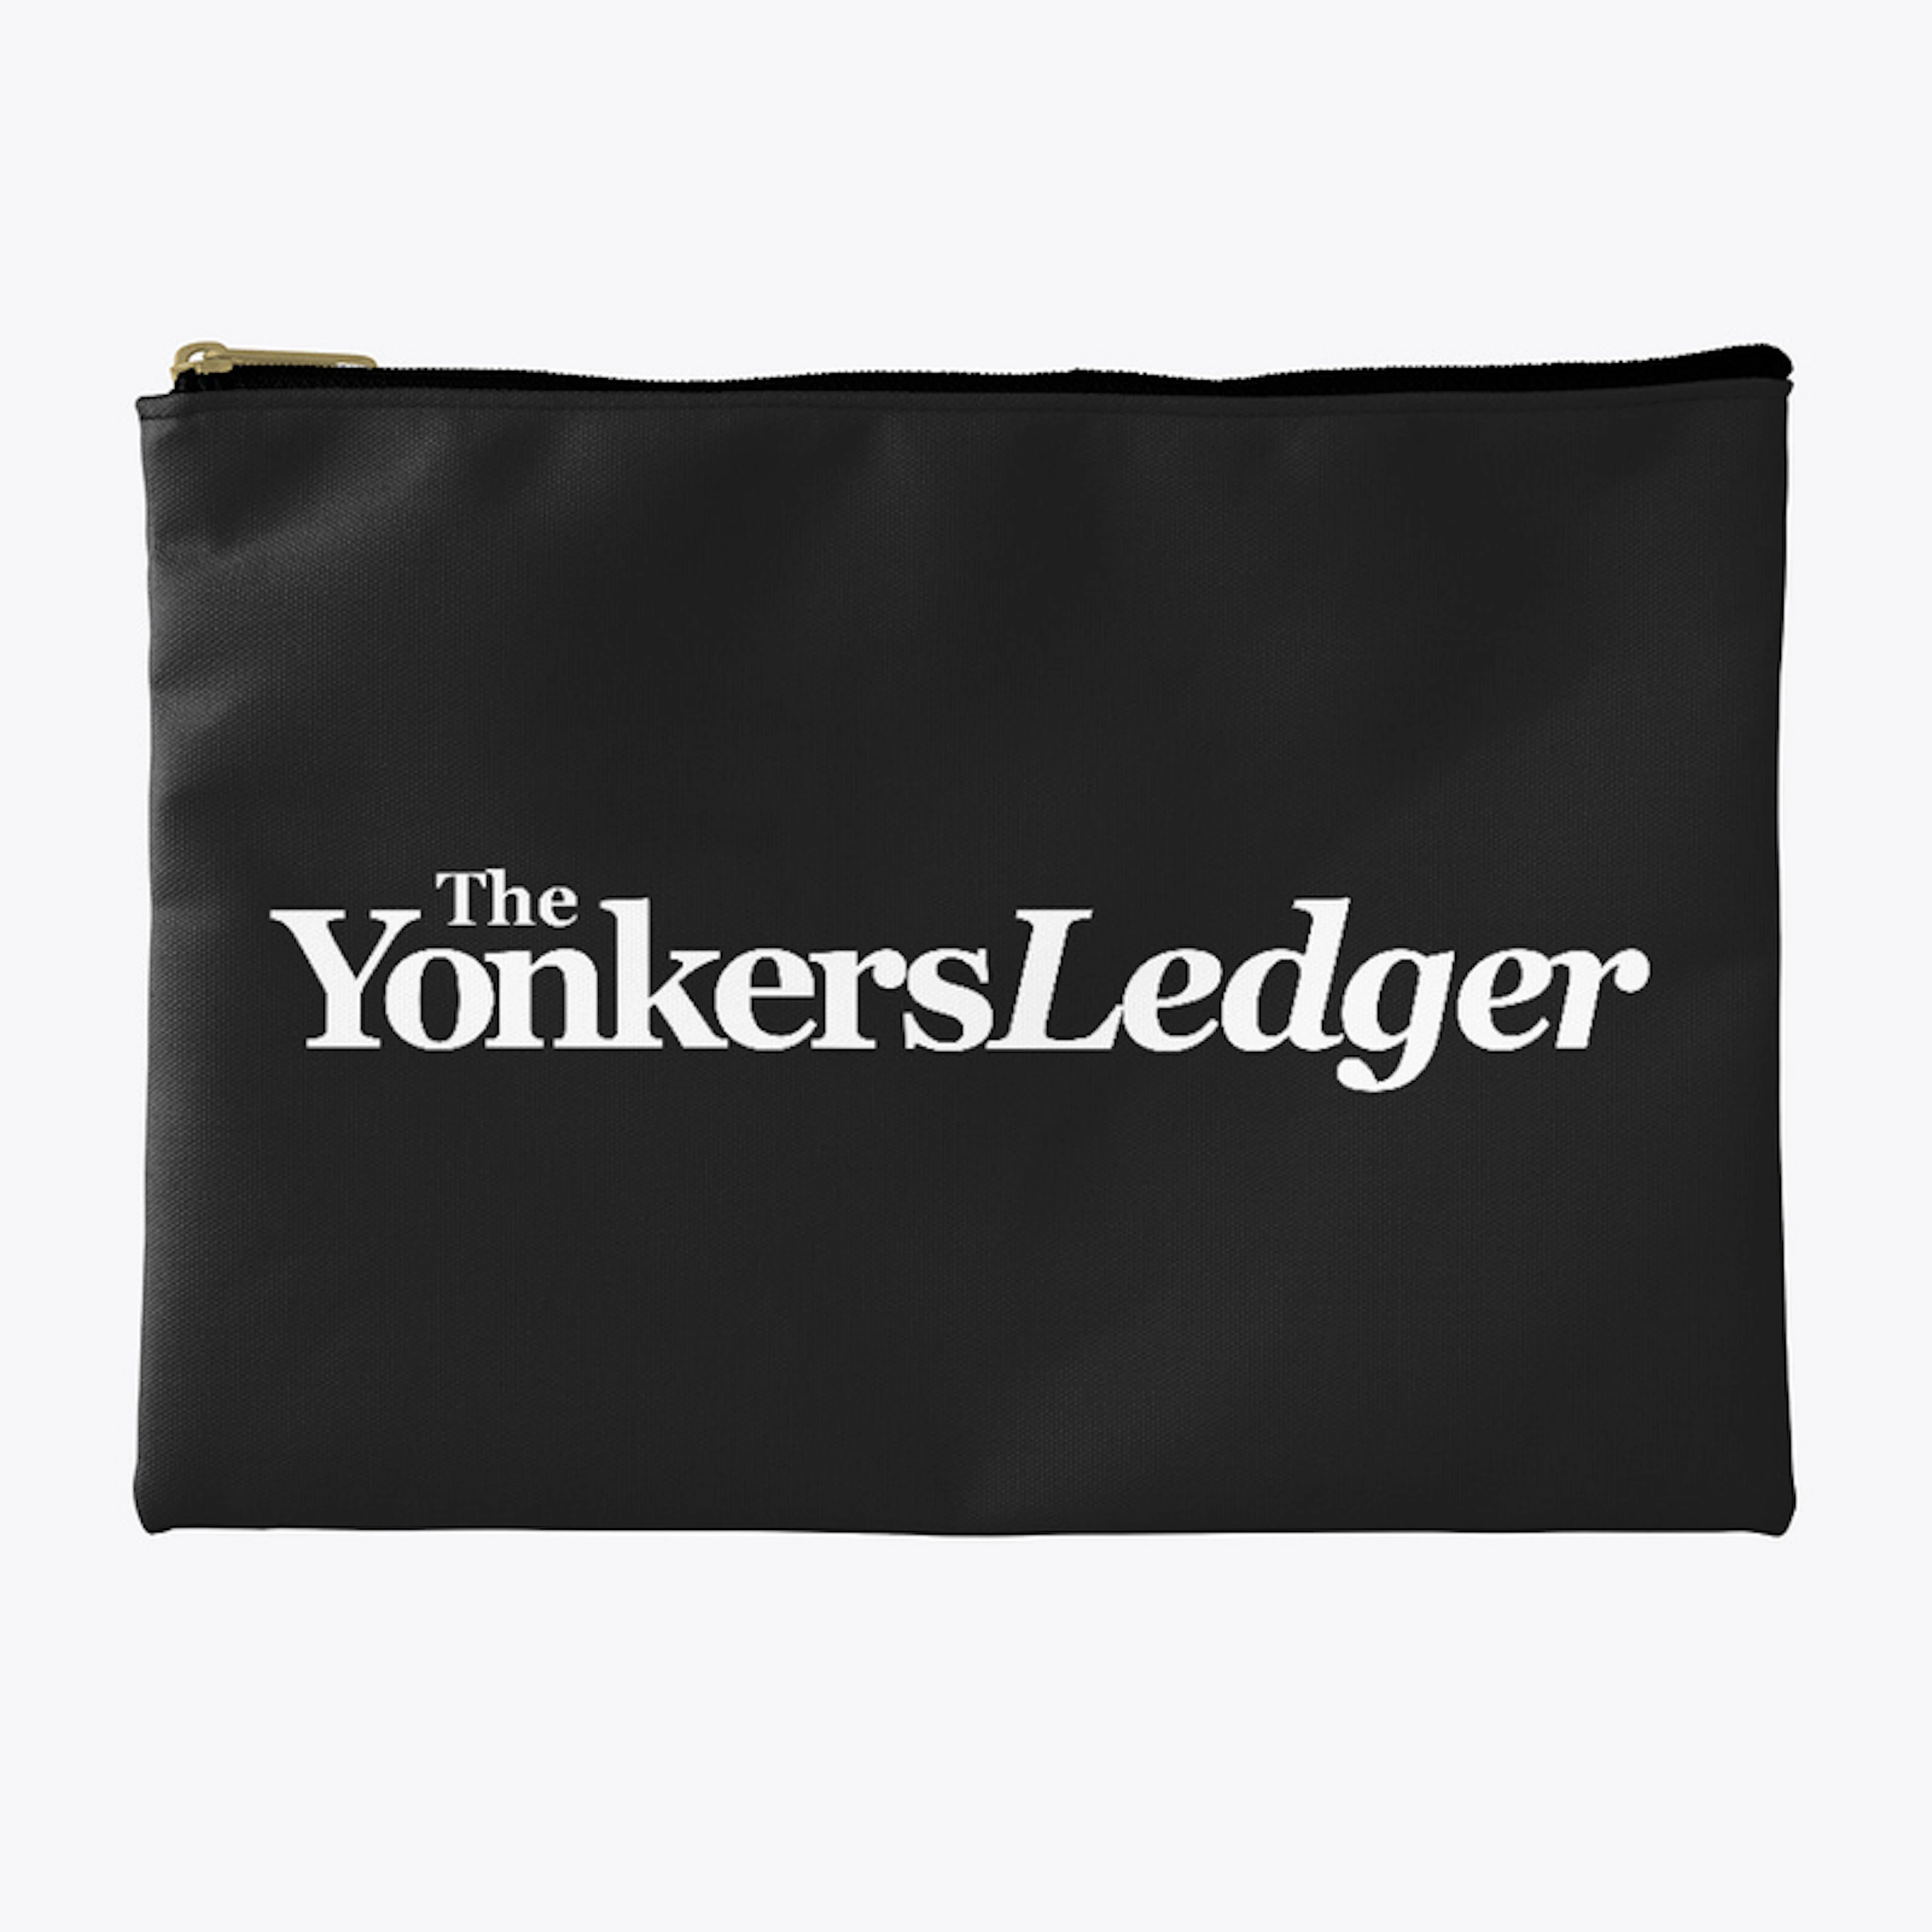 The Yonkers Ledger Pouch